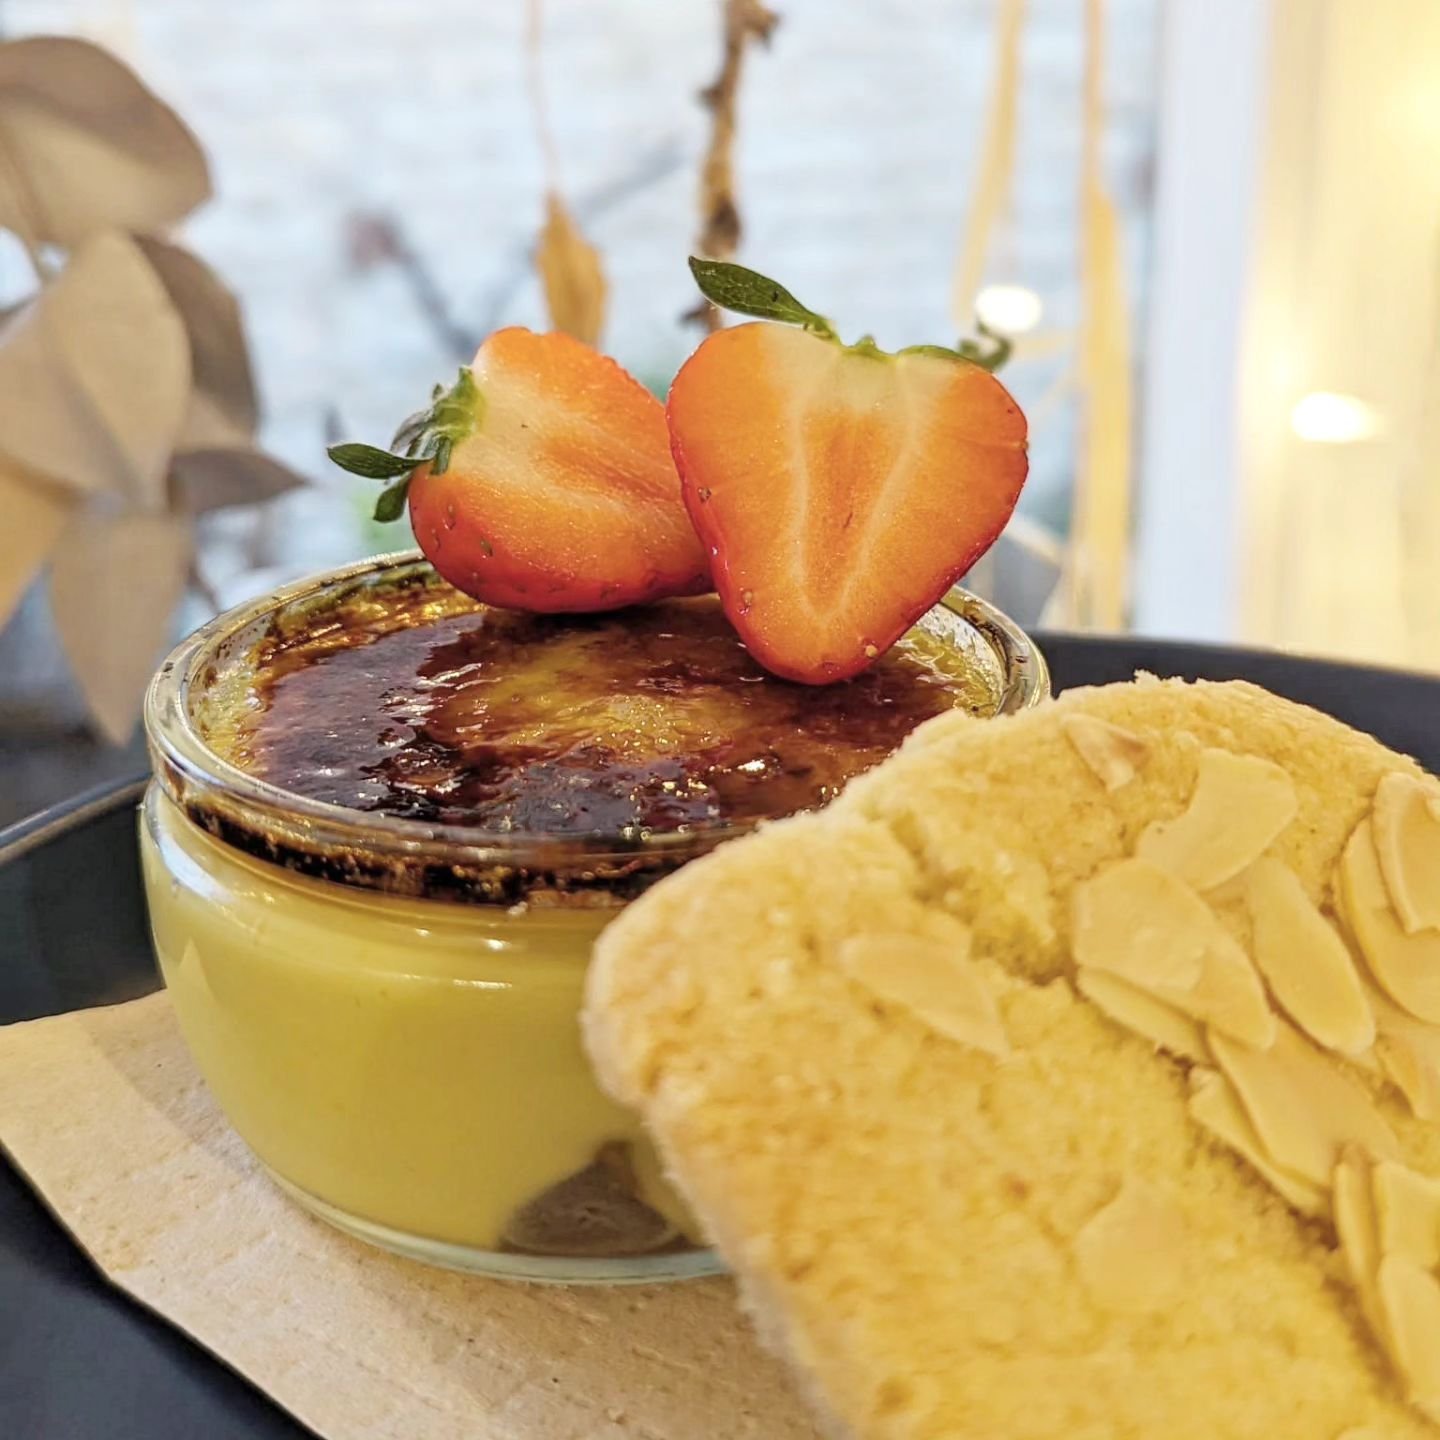 Gloriously creamy British rhubarb and strawberry (yes, British strawbs!) cr&egrave;me brul&eacute;e. With a hint of coconut and a crunchy almond shortbread. Today, for one day only!!!! 💕

#shopstamford #vegandessert #vegancremebrulee #stamfordgreenq